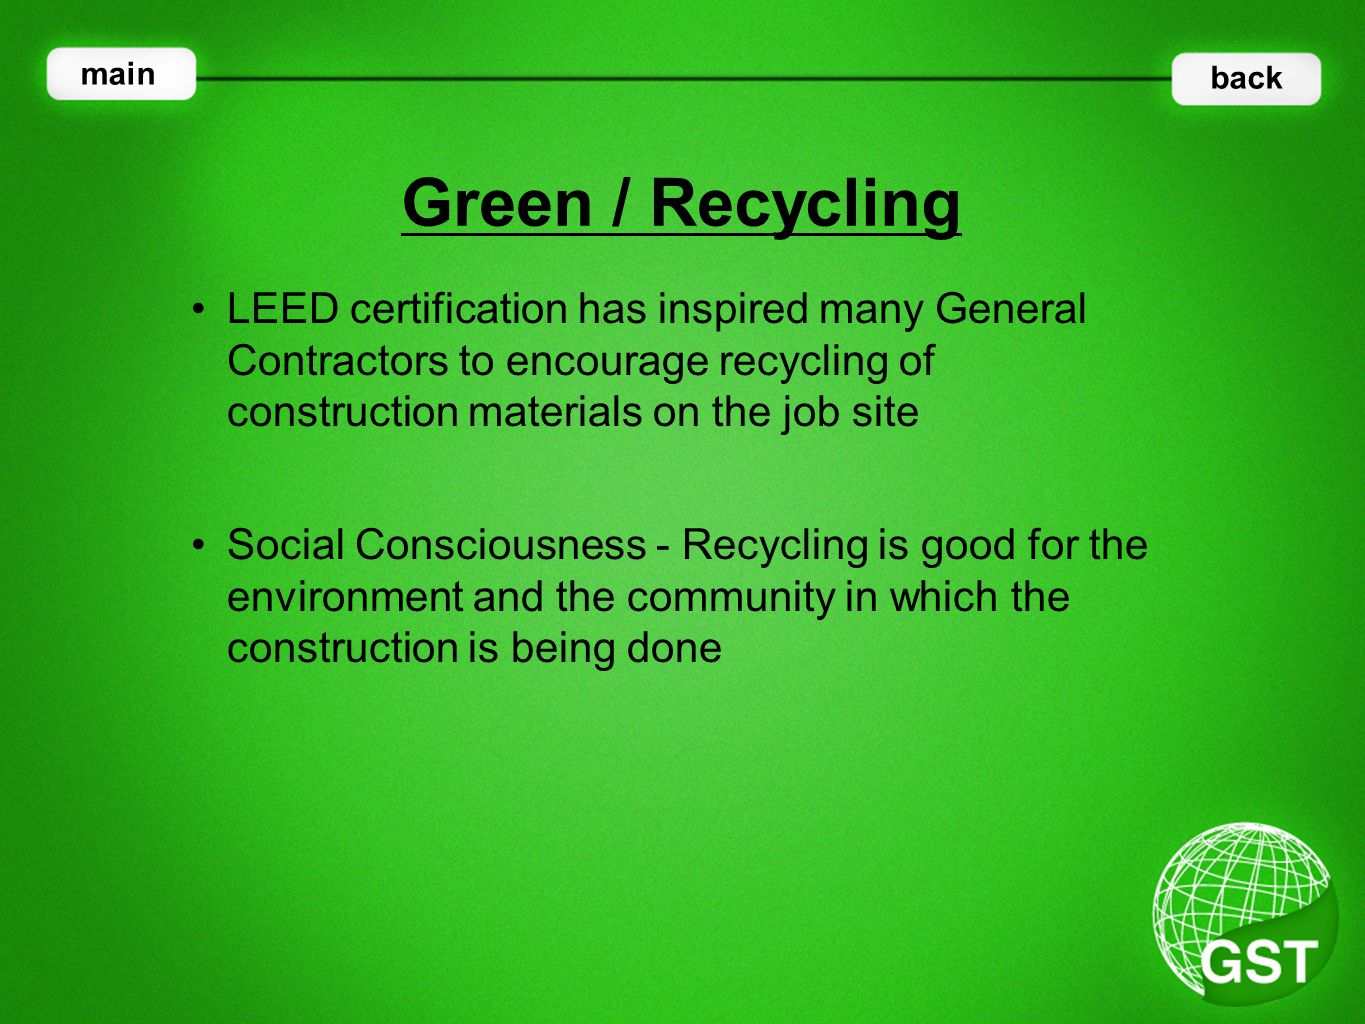 LEED certification has inspired many General Contractors to encourage recycling of construction materials on the job site Green / Recycling main back Social Consciousness - Recycling is good for the environment and the community in which the construction is being done